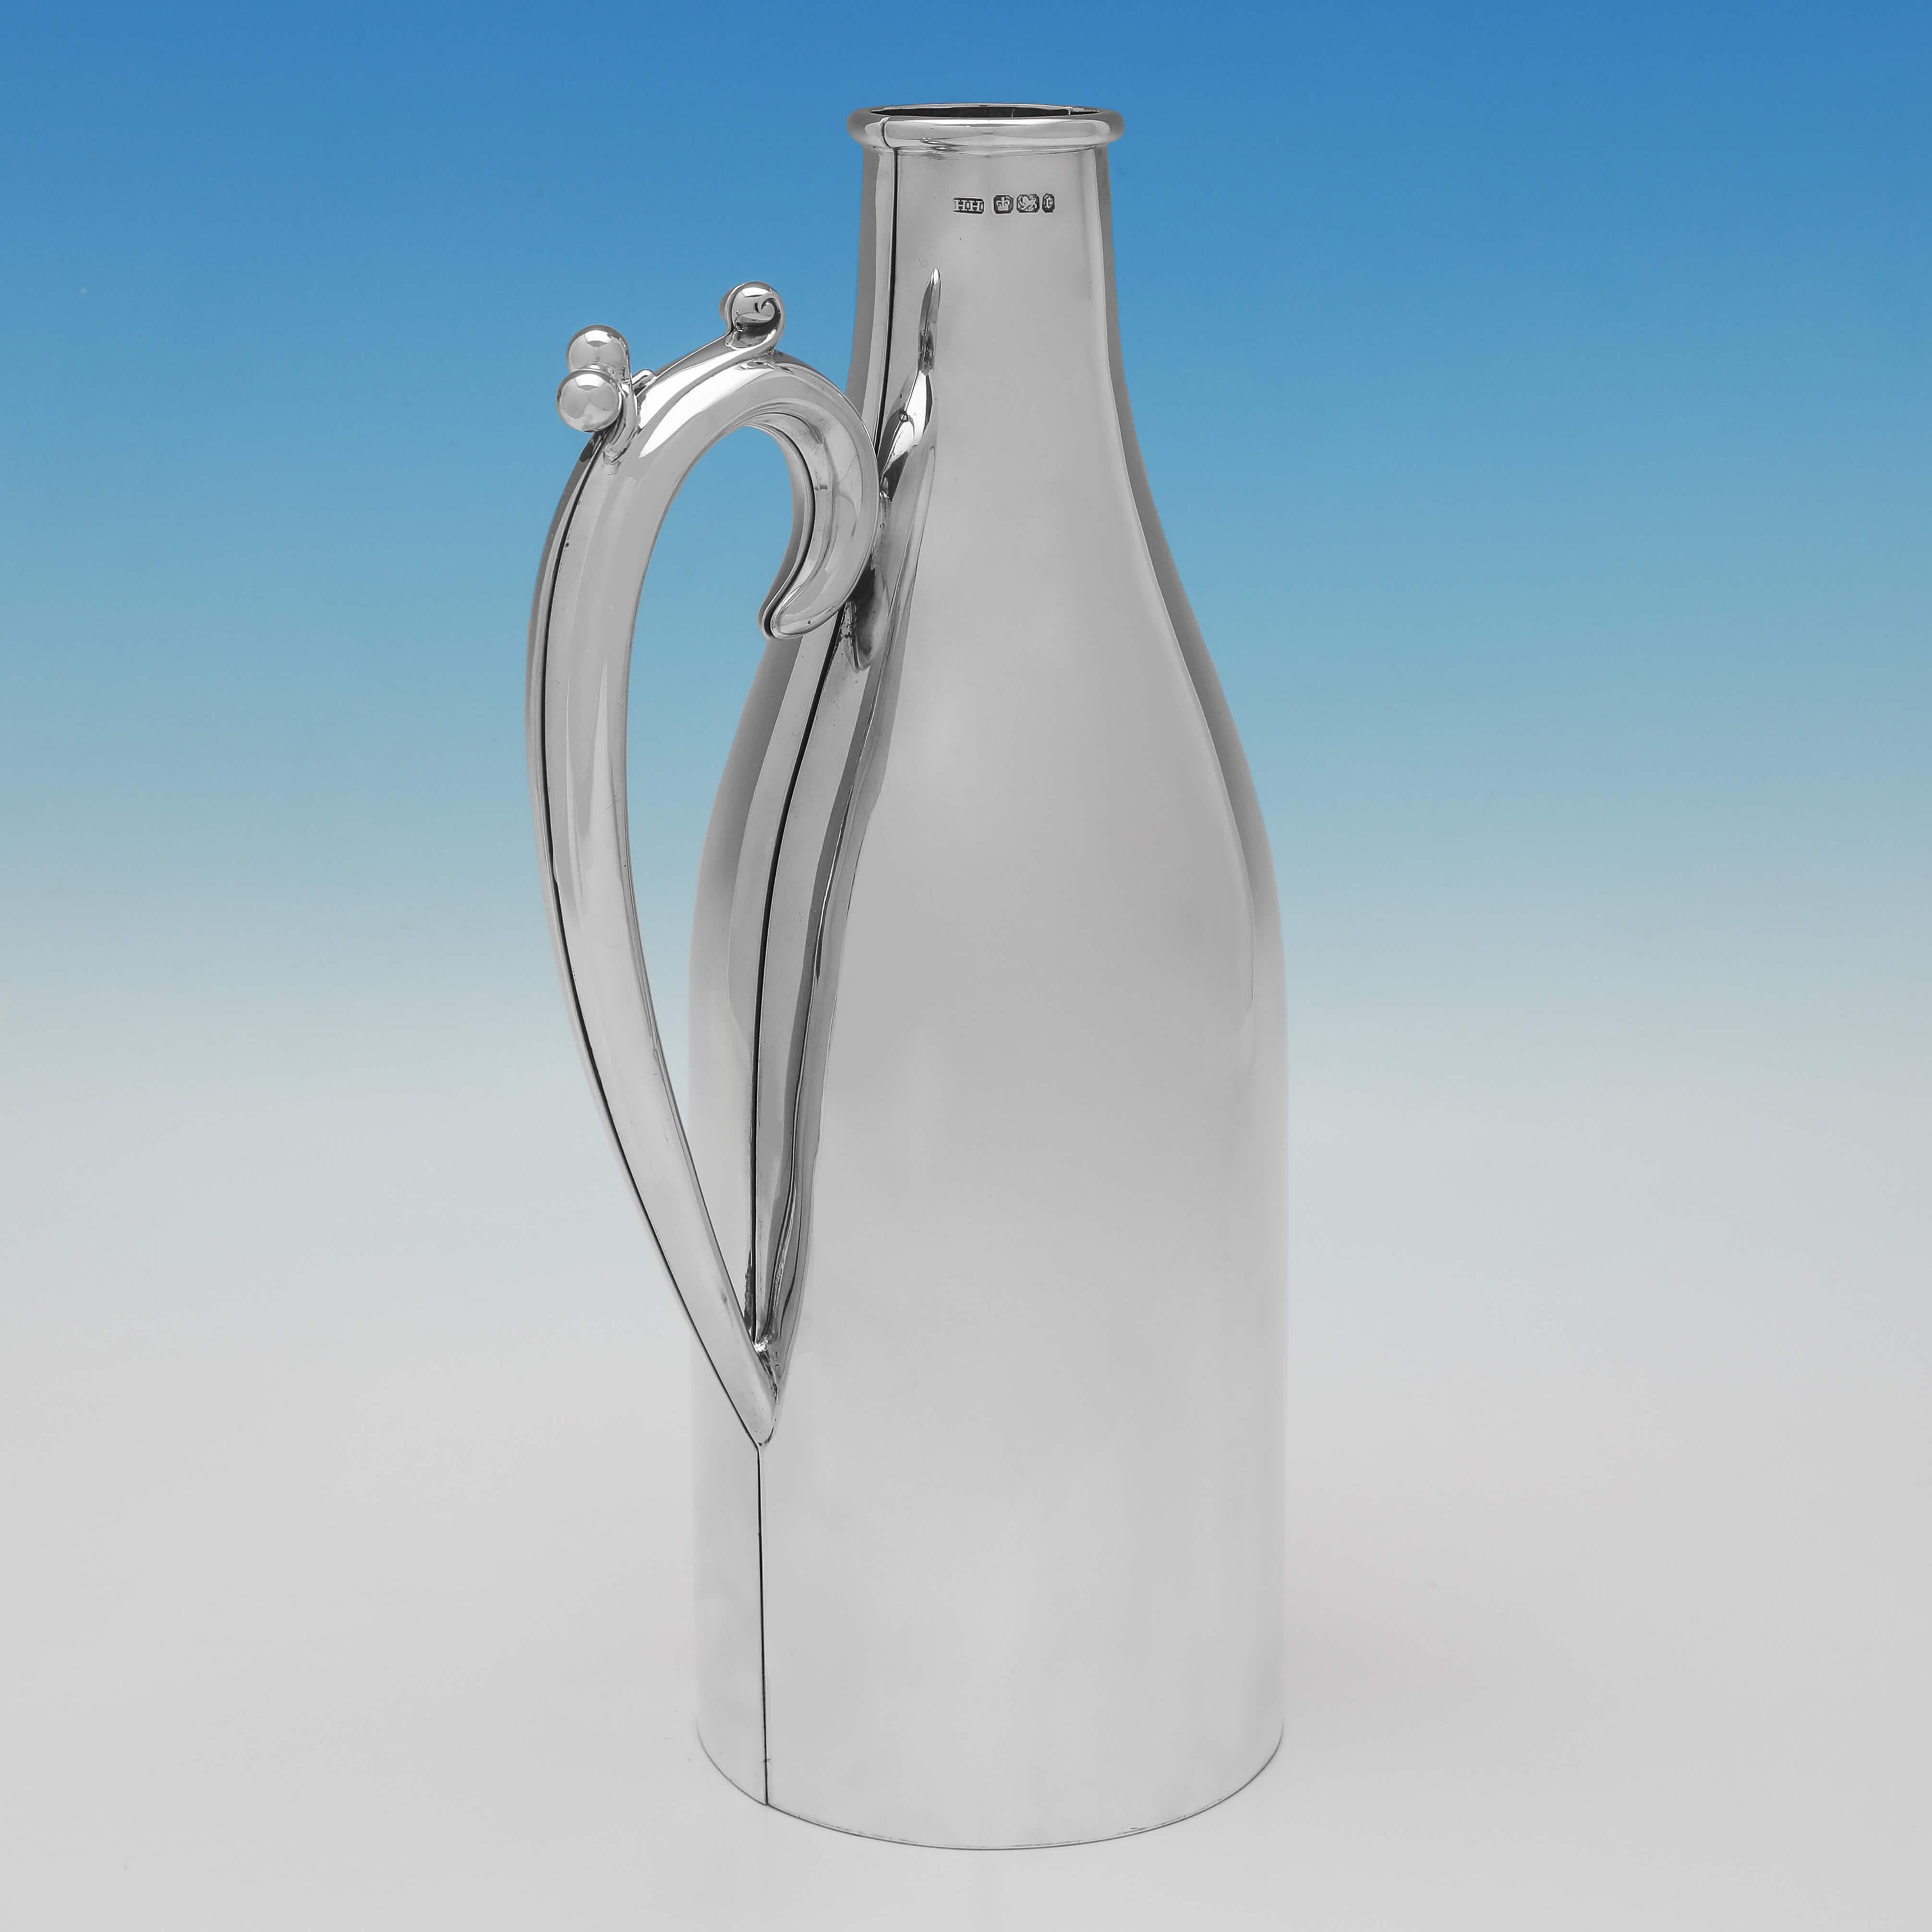 Hallmarked in Sheffield in 1895 by Harrison Brothers & Howson, this handsome, Victorian, Antique sterling silver wine bottle holder, is elegantly simple in design.

It is very rare to find sterling silver examples of wine bottle holders, the